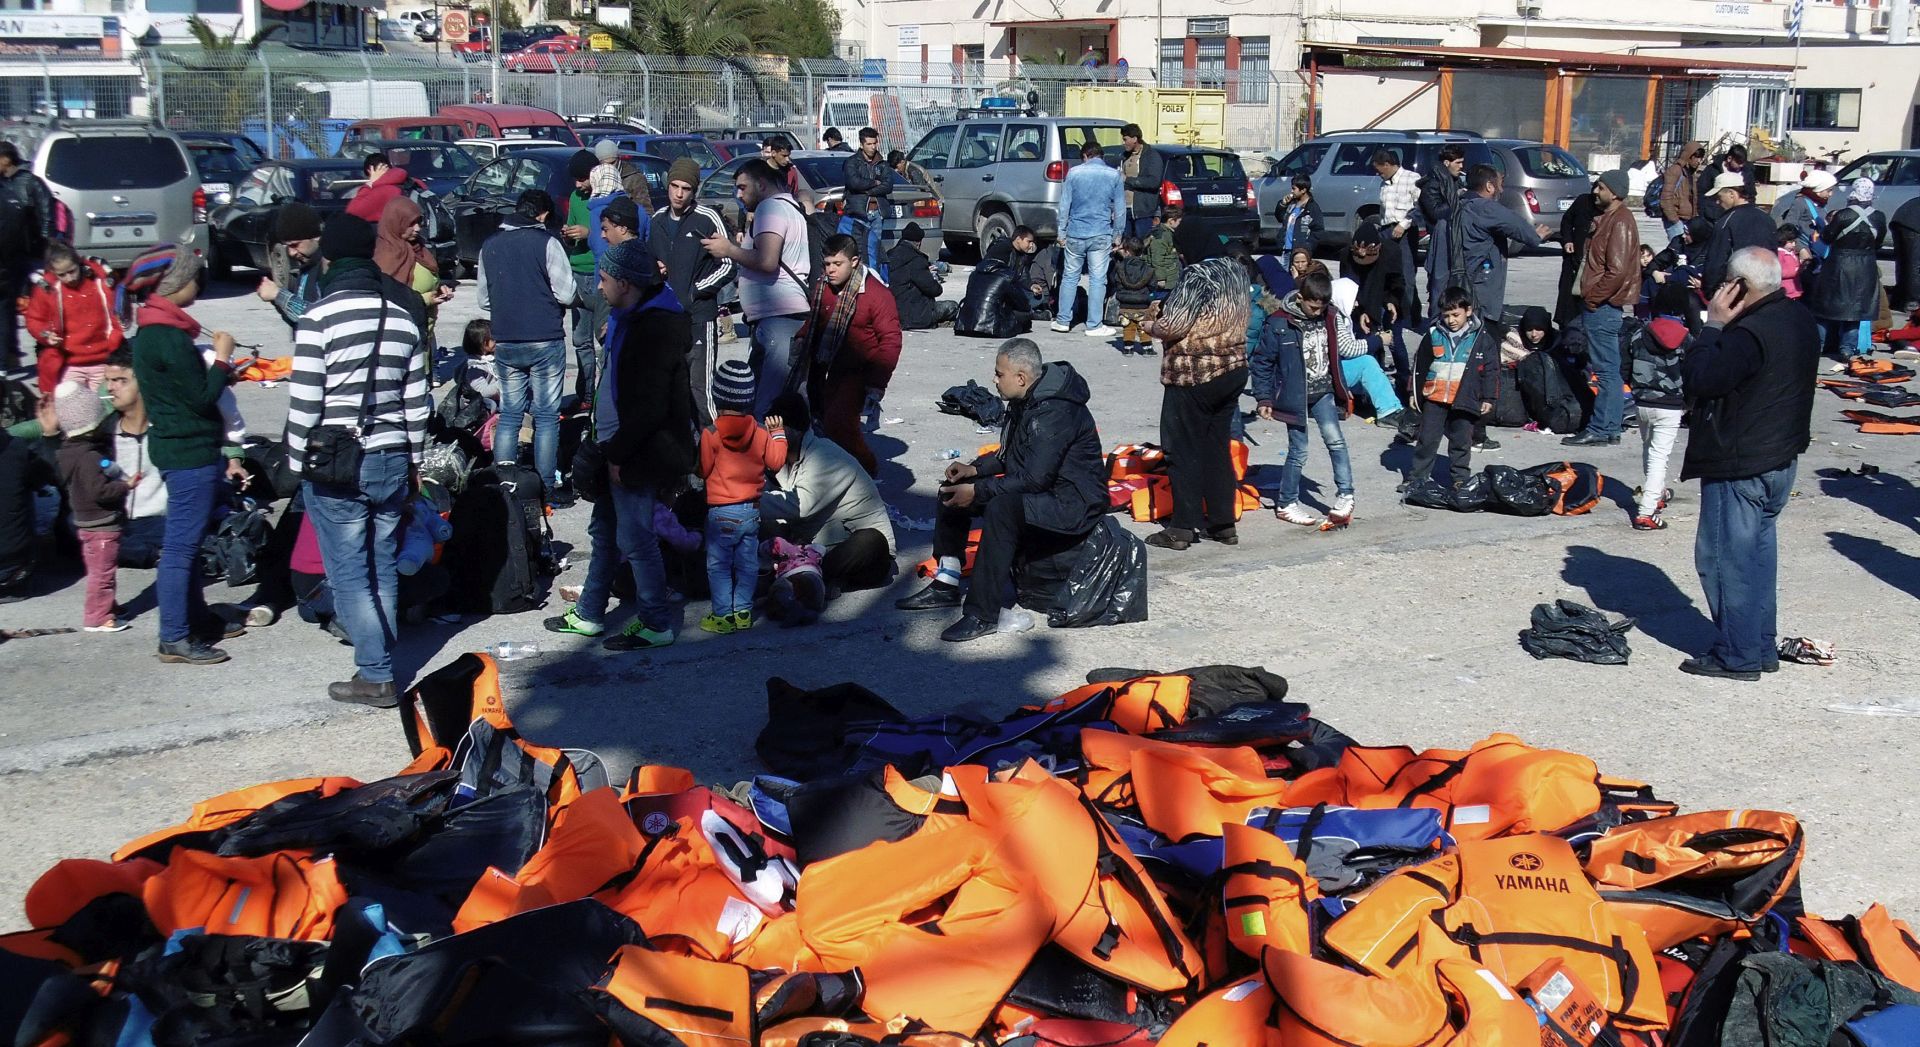 epa05140059 Life vests are piled up after migrants and refugees disembark a coastguard boat in Mytilini, Lesvos Island, Greece, 02 February 2016, The Lesvos coast guard patrol boat 'PATH 80 - Agios Efstratios' on 02 February 2016, rescued 413 migrants and refugees found floating adrift in the sea between the island and the Turkish coast - breaking the record for the number brought to safety in a single rescue operation. 2,000 refugees and migrants to the eastern shores of Lesvos, with the coast guard and Frontex called to rescue 1,000 from boats.  EPA/STRATIS BALASKAS